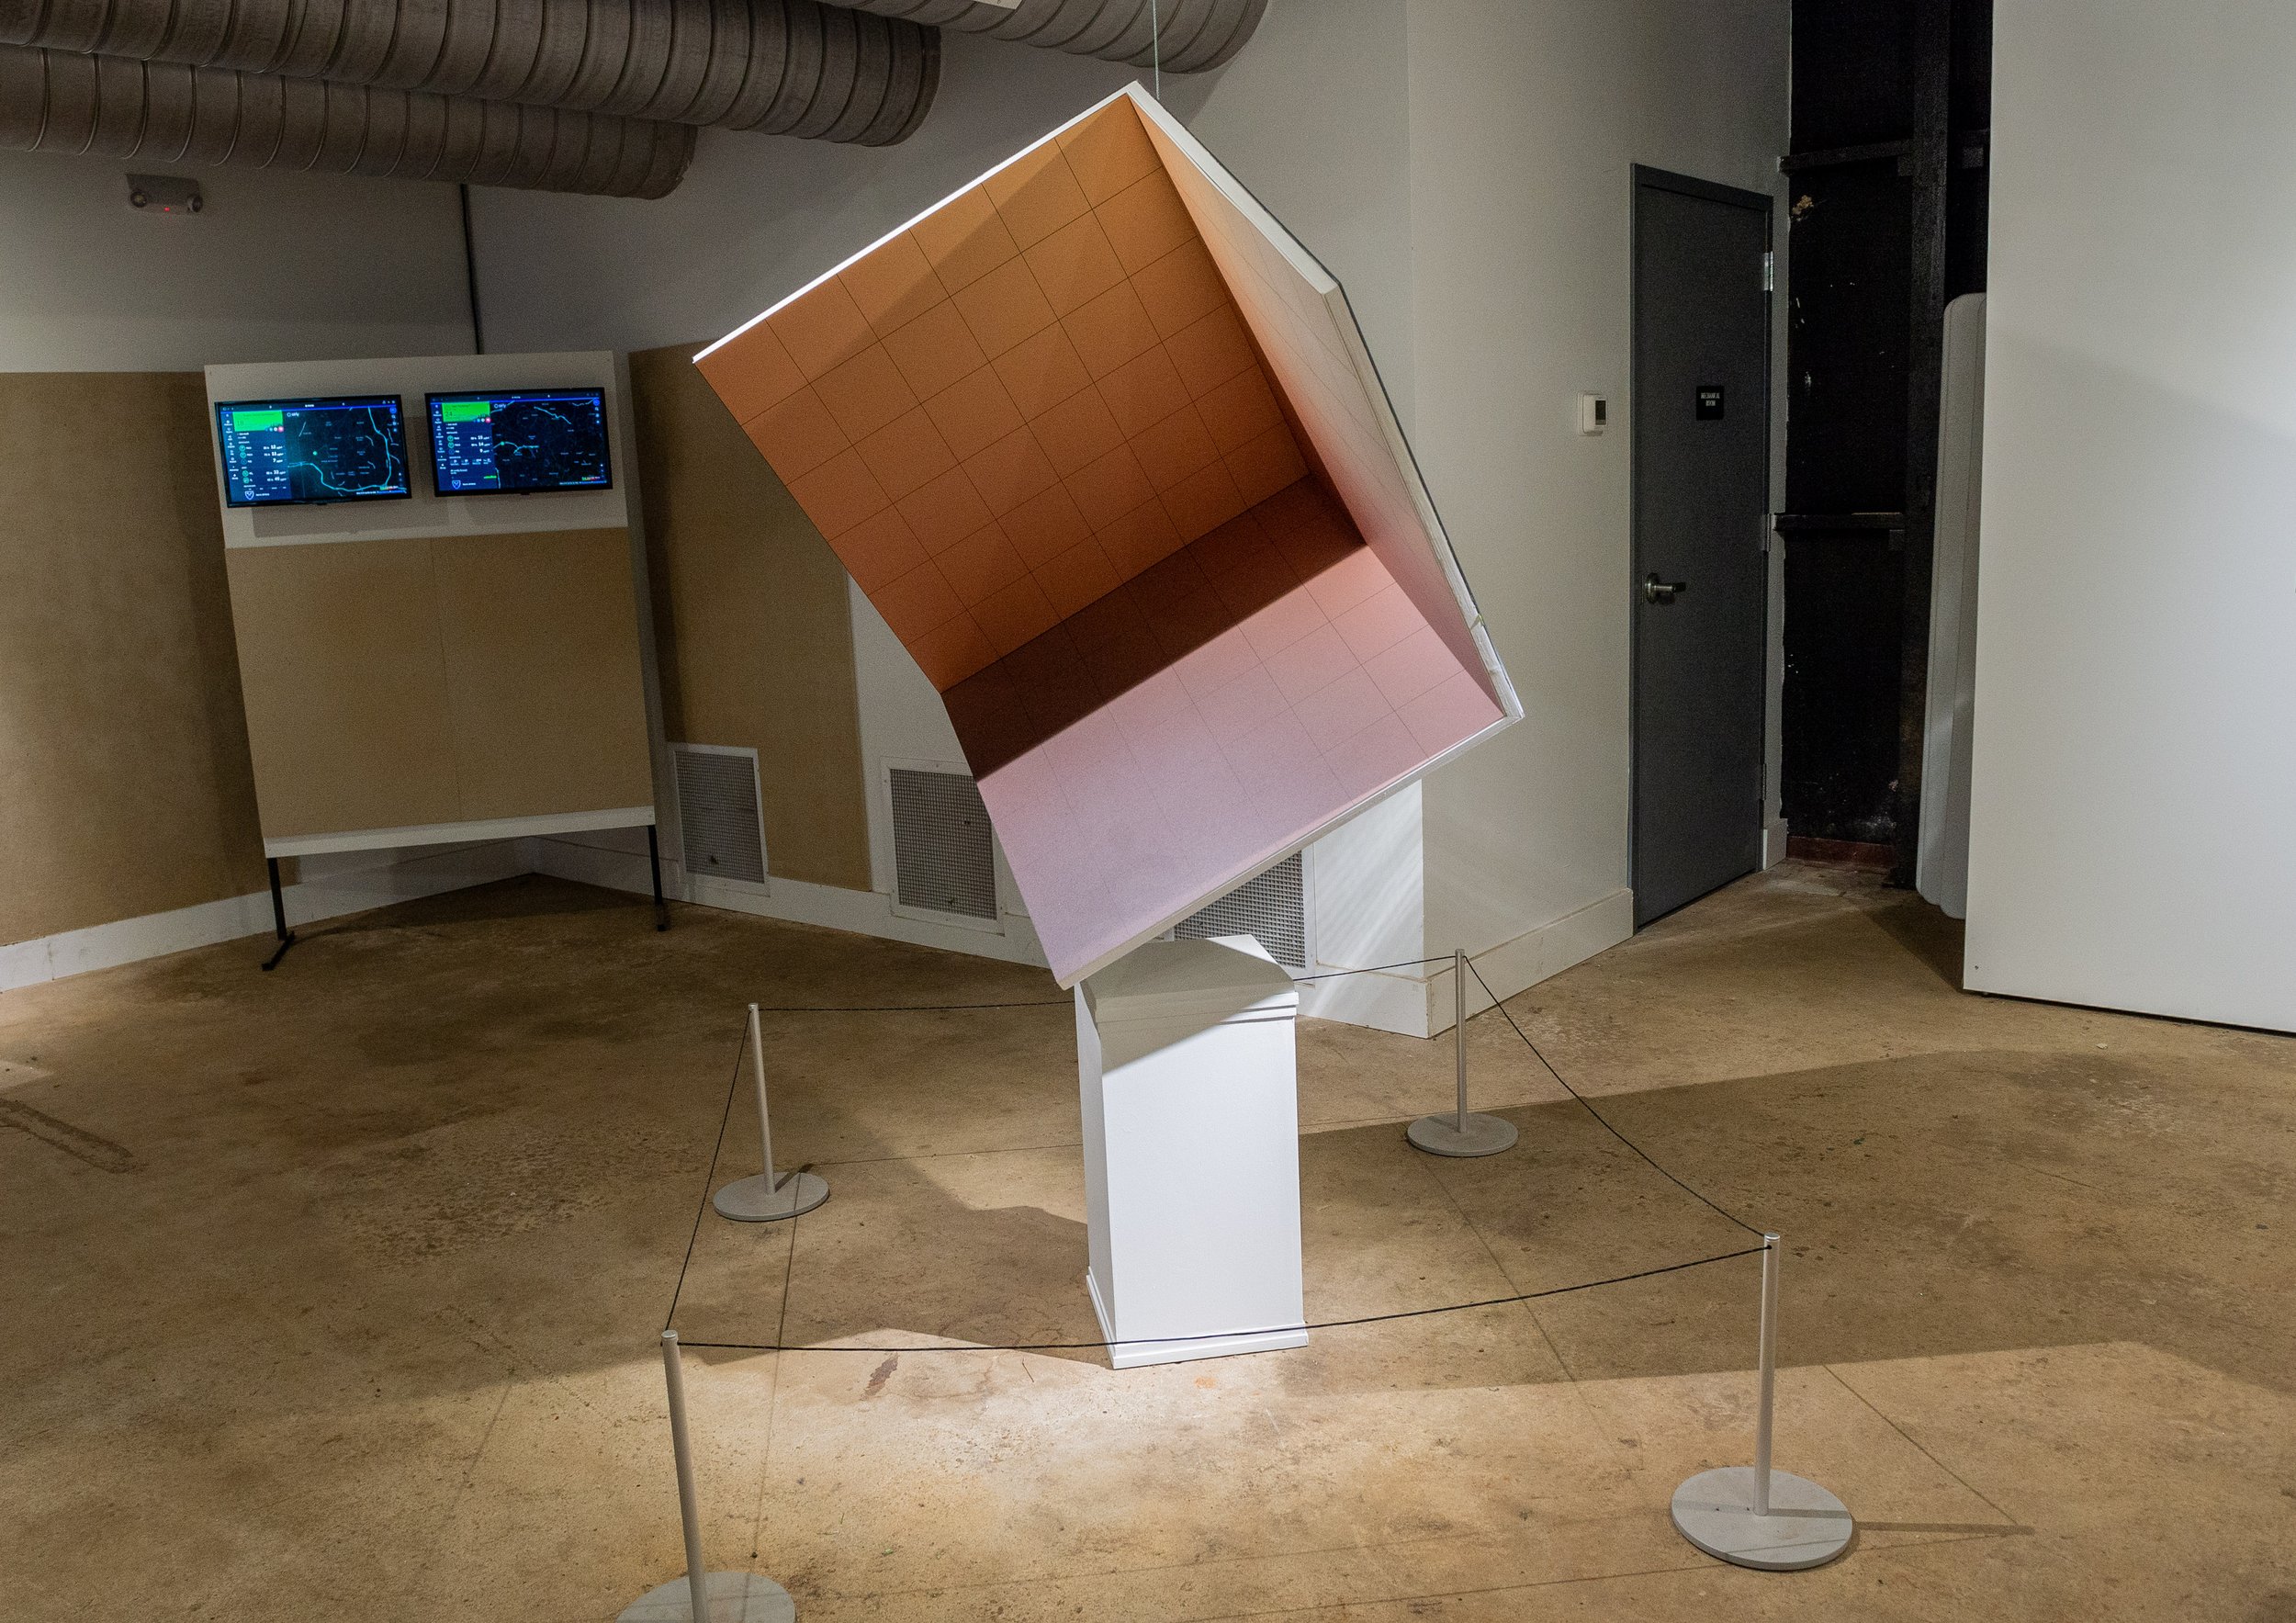 ScienceGallery549-Atlanta Justice-Breaking Out of Boxes-The Paradox of Race 2023.JPG